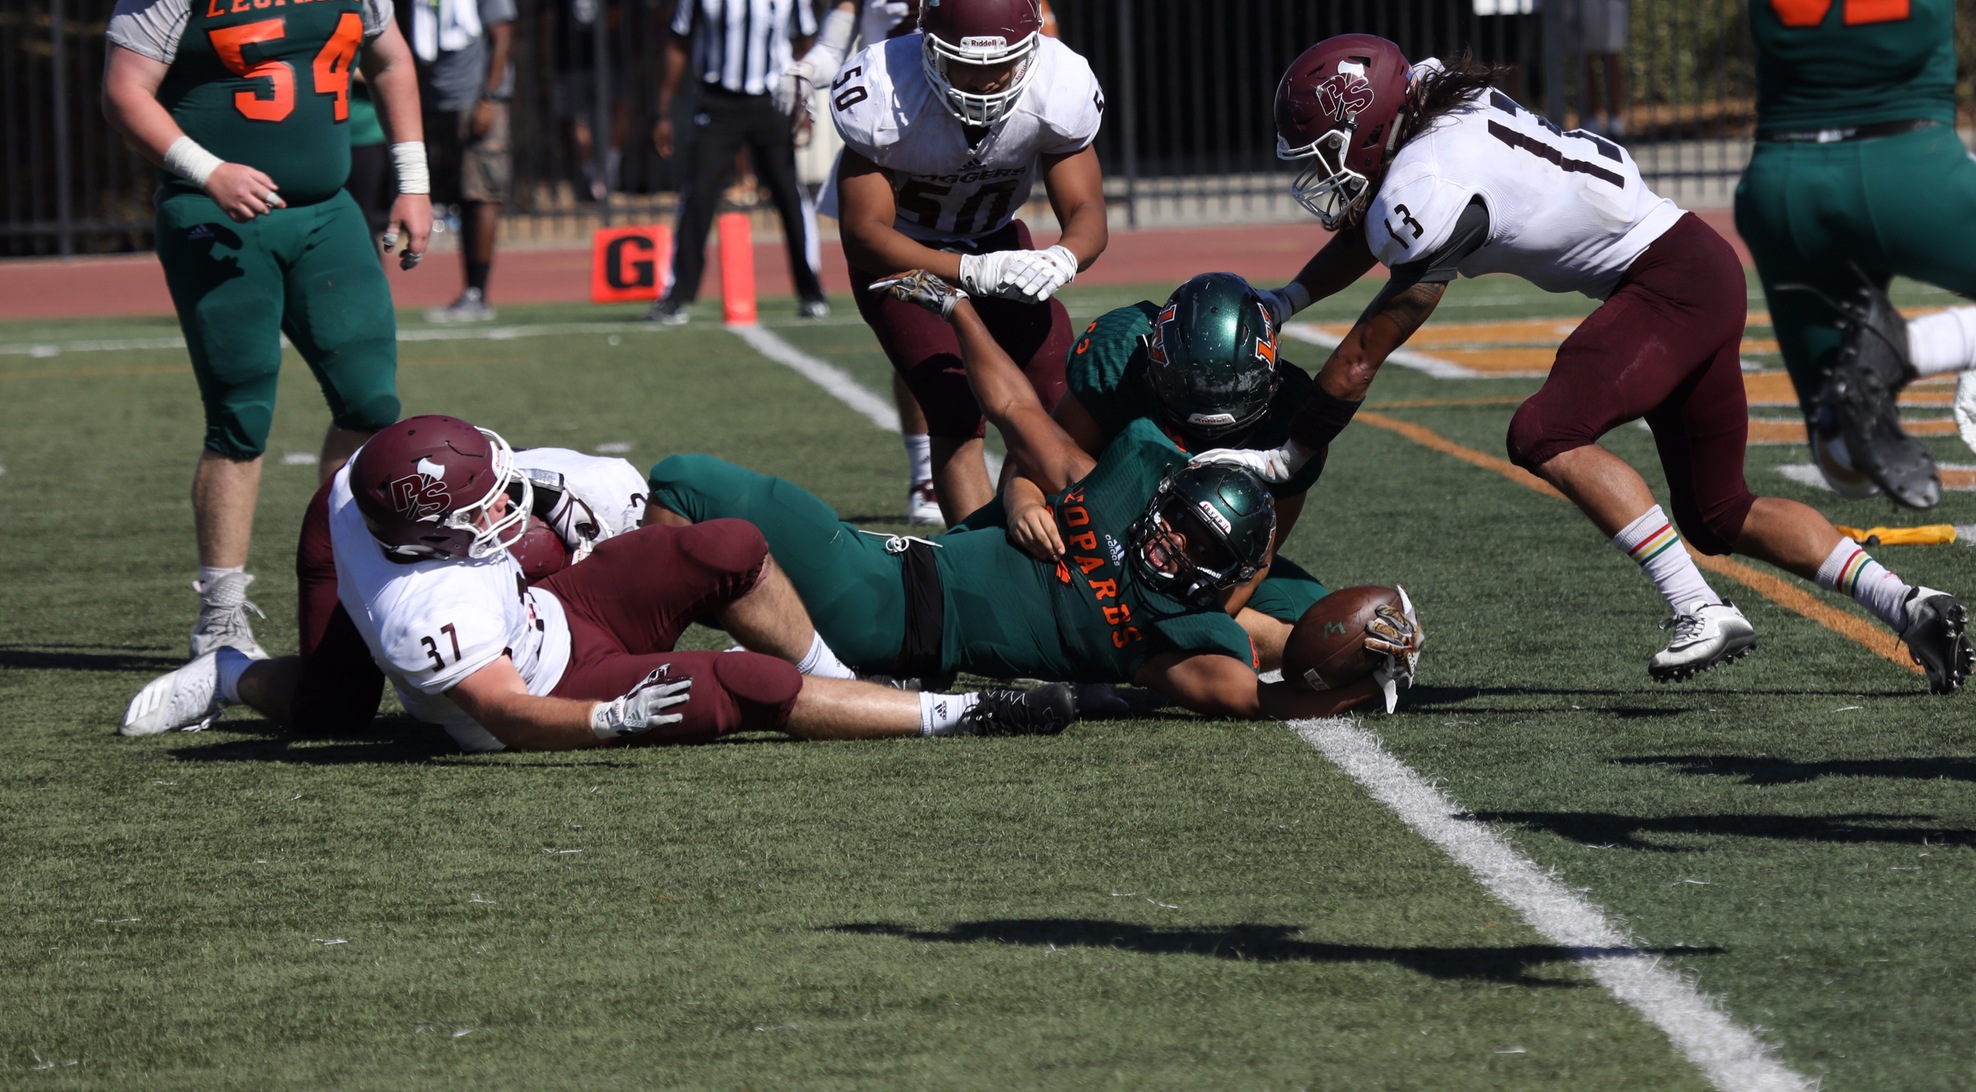 Football falls to Puget Sound at home